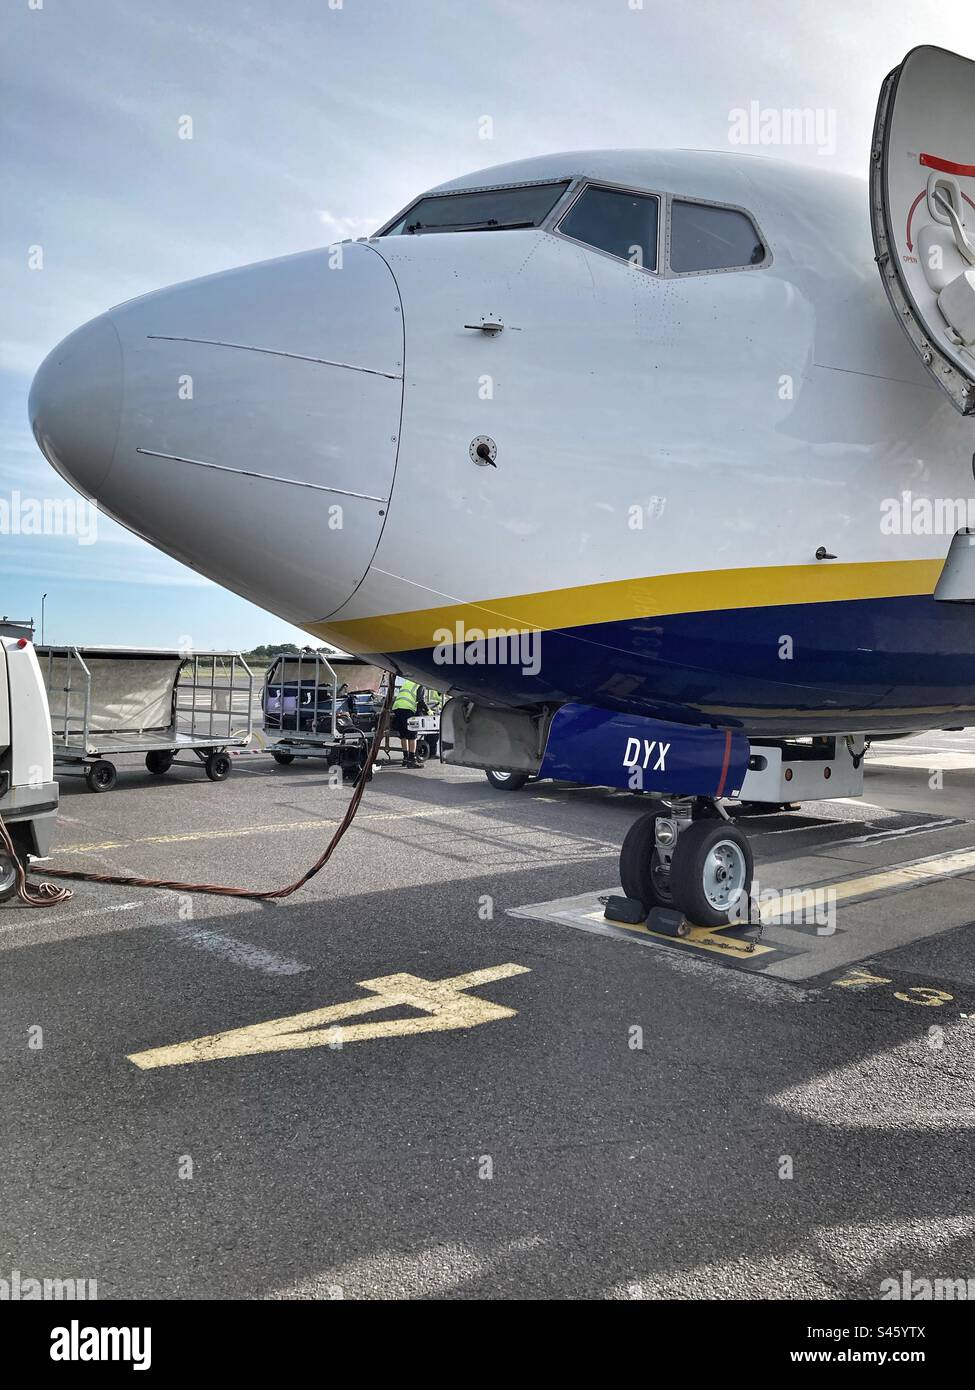 Ryan air airplane at Bournemouth airport getting ready to depart. Stock Photo